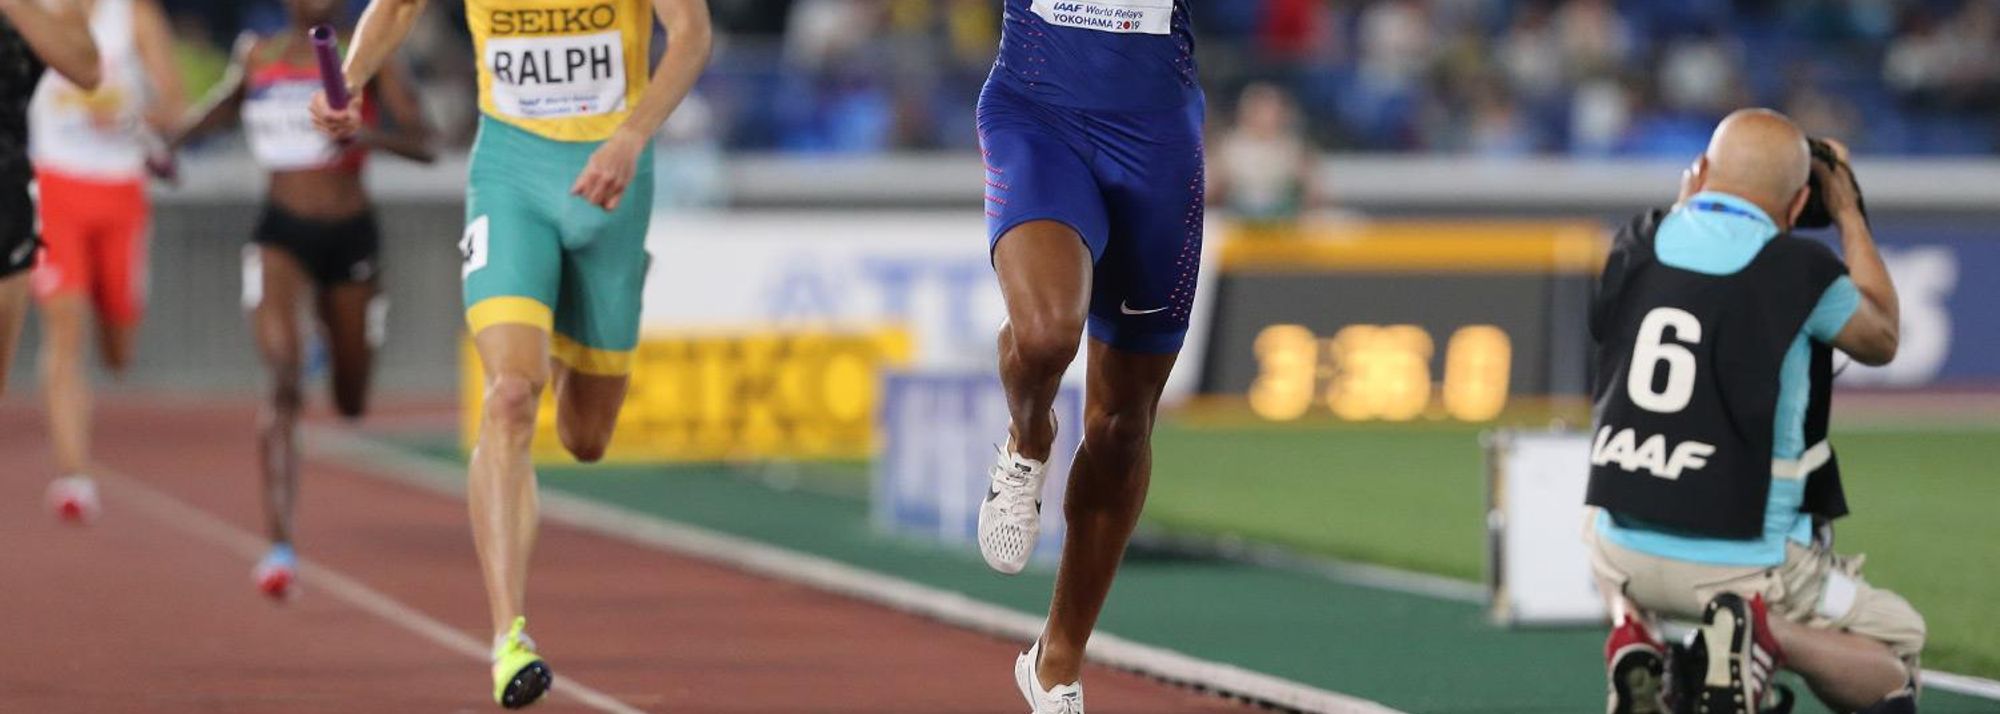 The United States kicked off the IAAF World Relays Yokohama 2019 with a bang on Saturday (11), producing convincing victories in the competition’s two newest events.